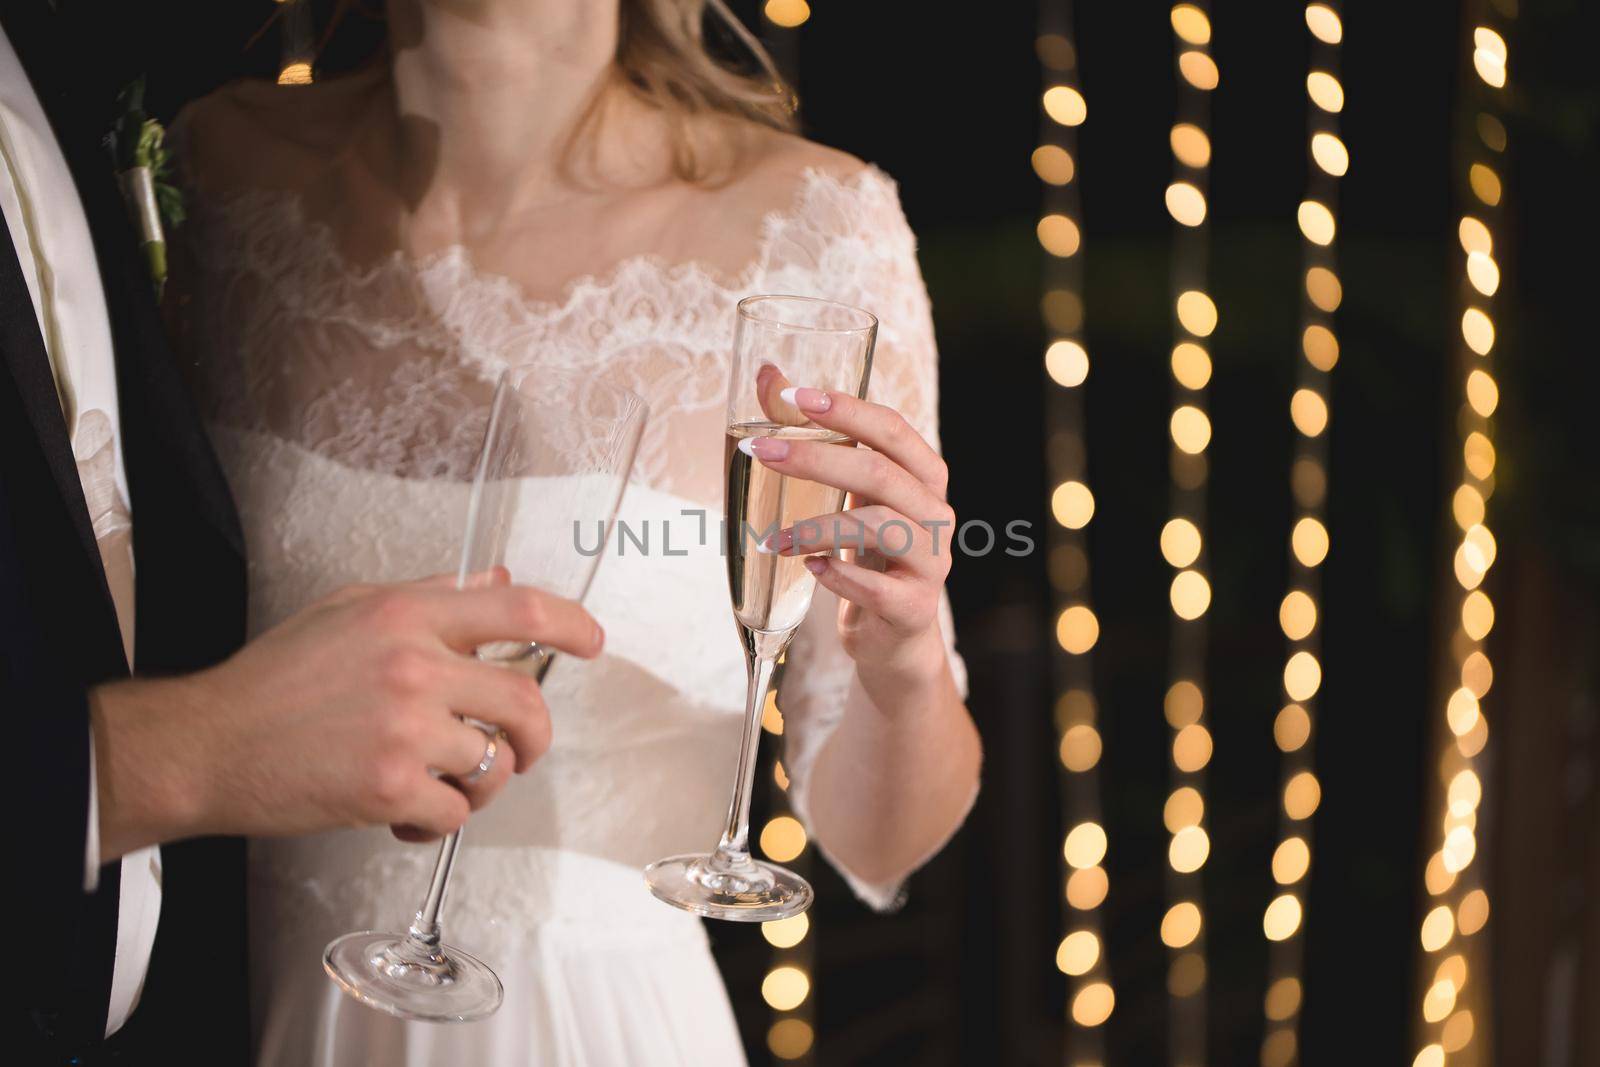 The bride and groom hold crystal glasses filled with champagne. by StudioPeace